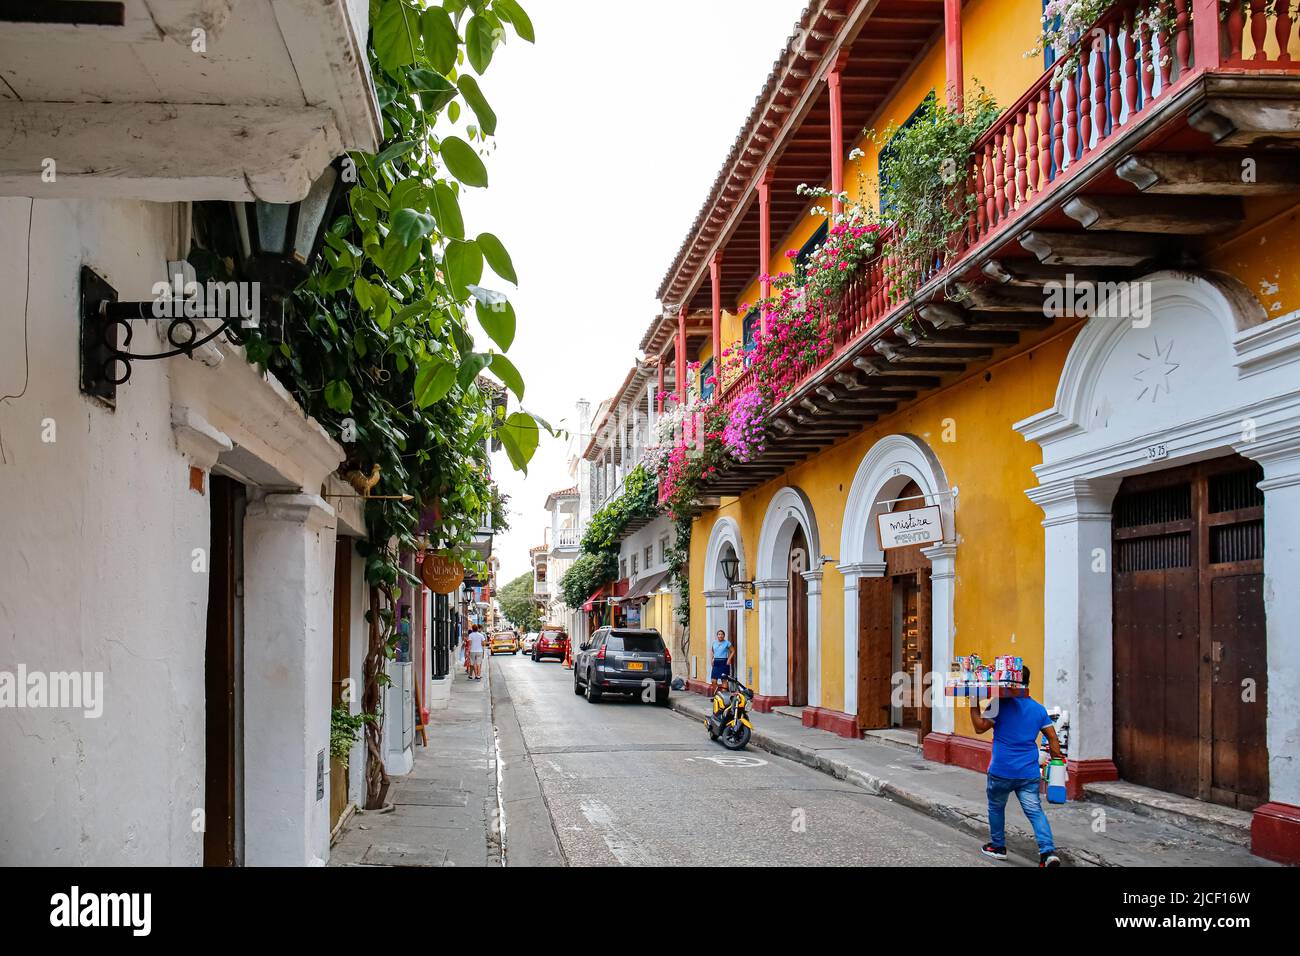 Typical colonial street with beautiful decorated, colorful buildings in Cartagena, Colombia Stock Photo